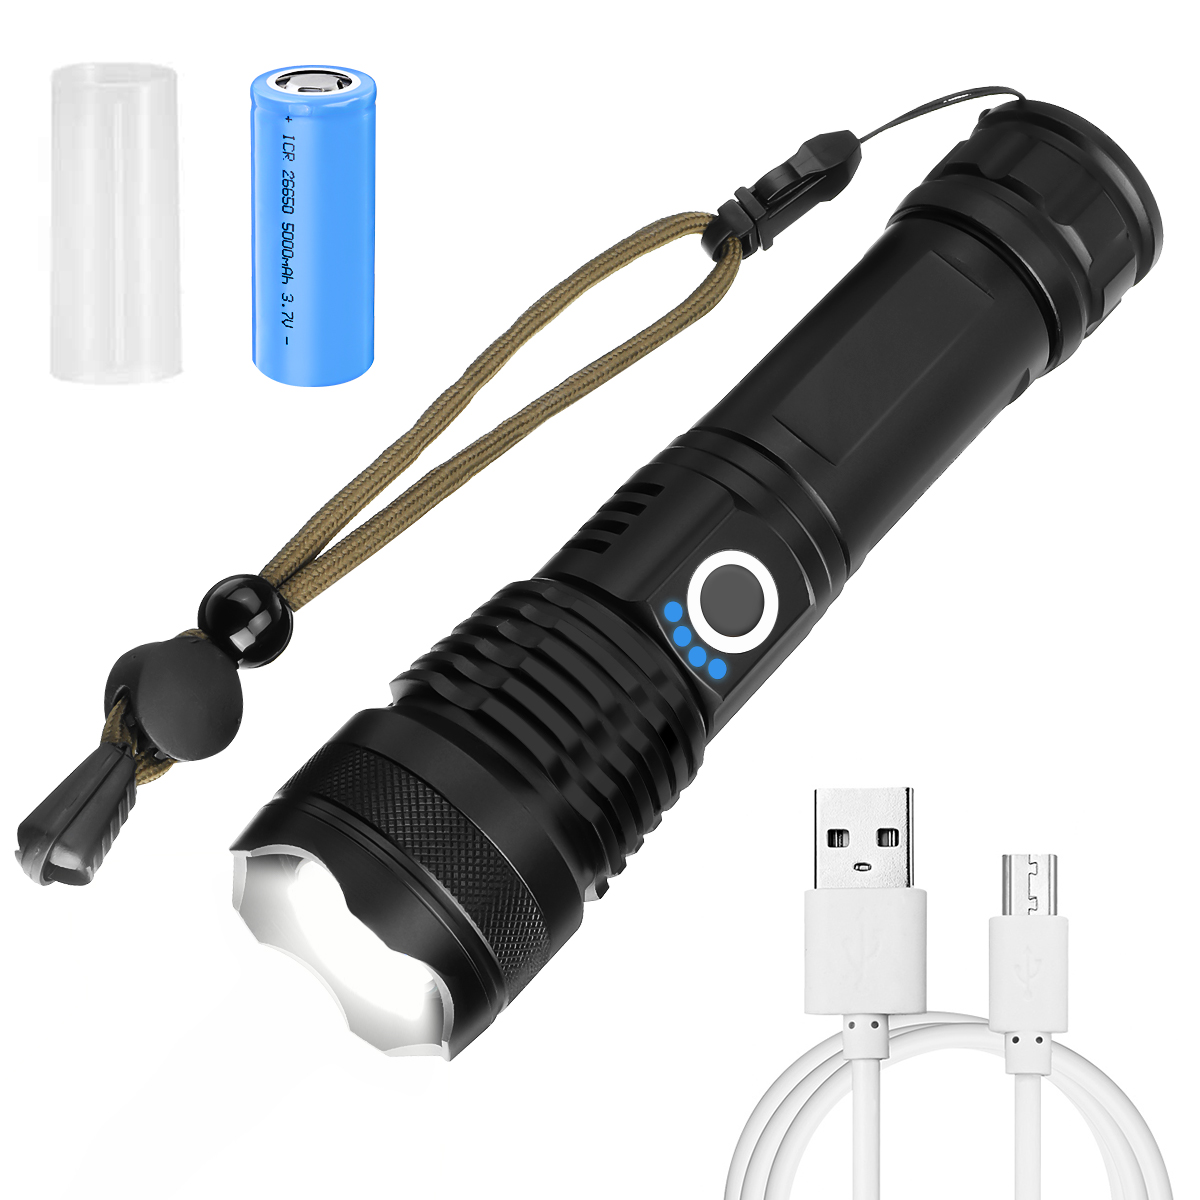 LIUMY-P50-LED-Zoomable-Flashlight-Set-with-26650-Battery-USB-Cable-Power-Display-USB-Rechargeable-LE-1819595-1